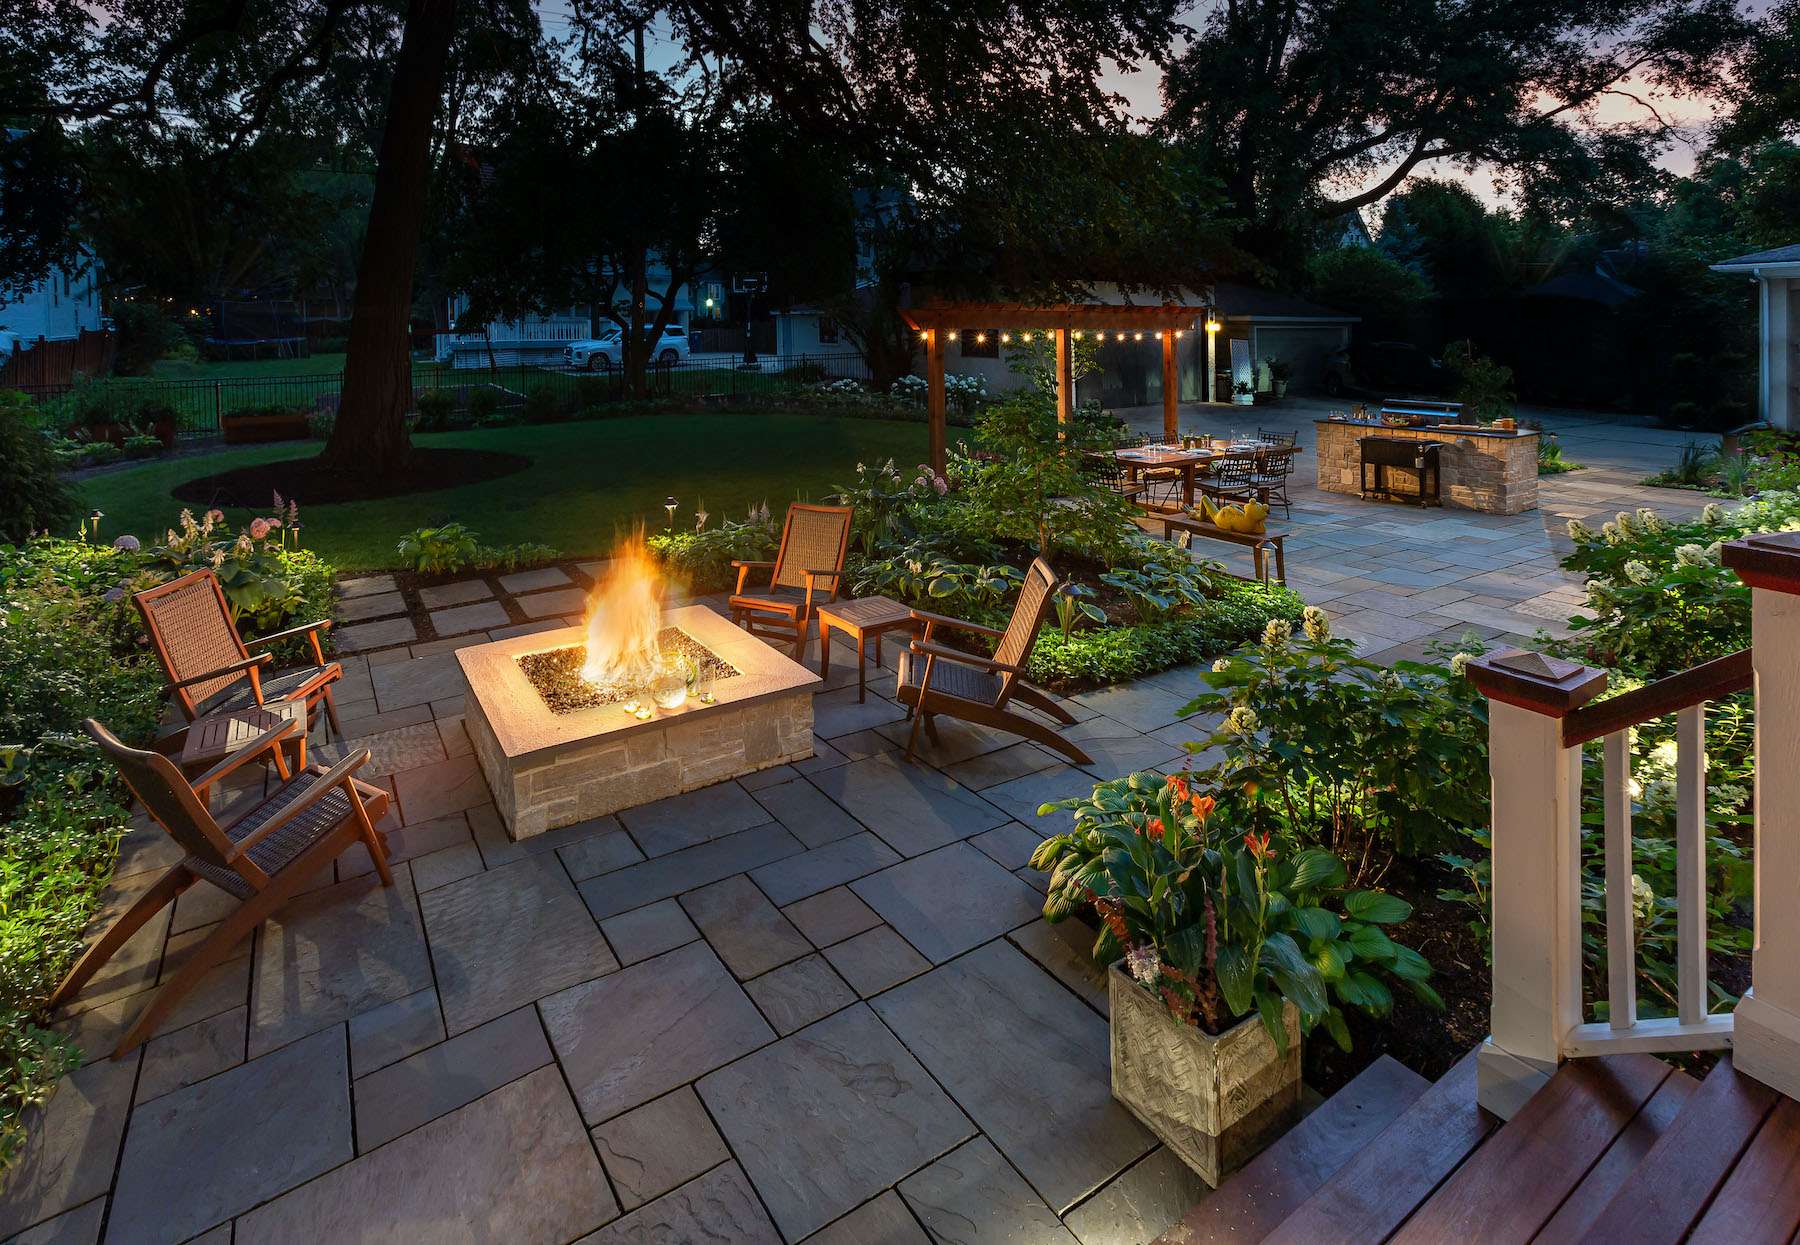 Wood Fire Pit vs. Gas Fire Pit: Which is Best for Your Backyard?